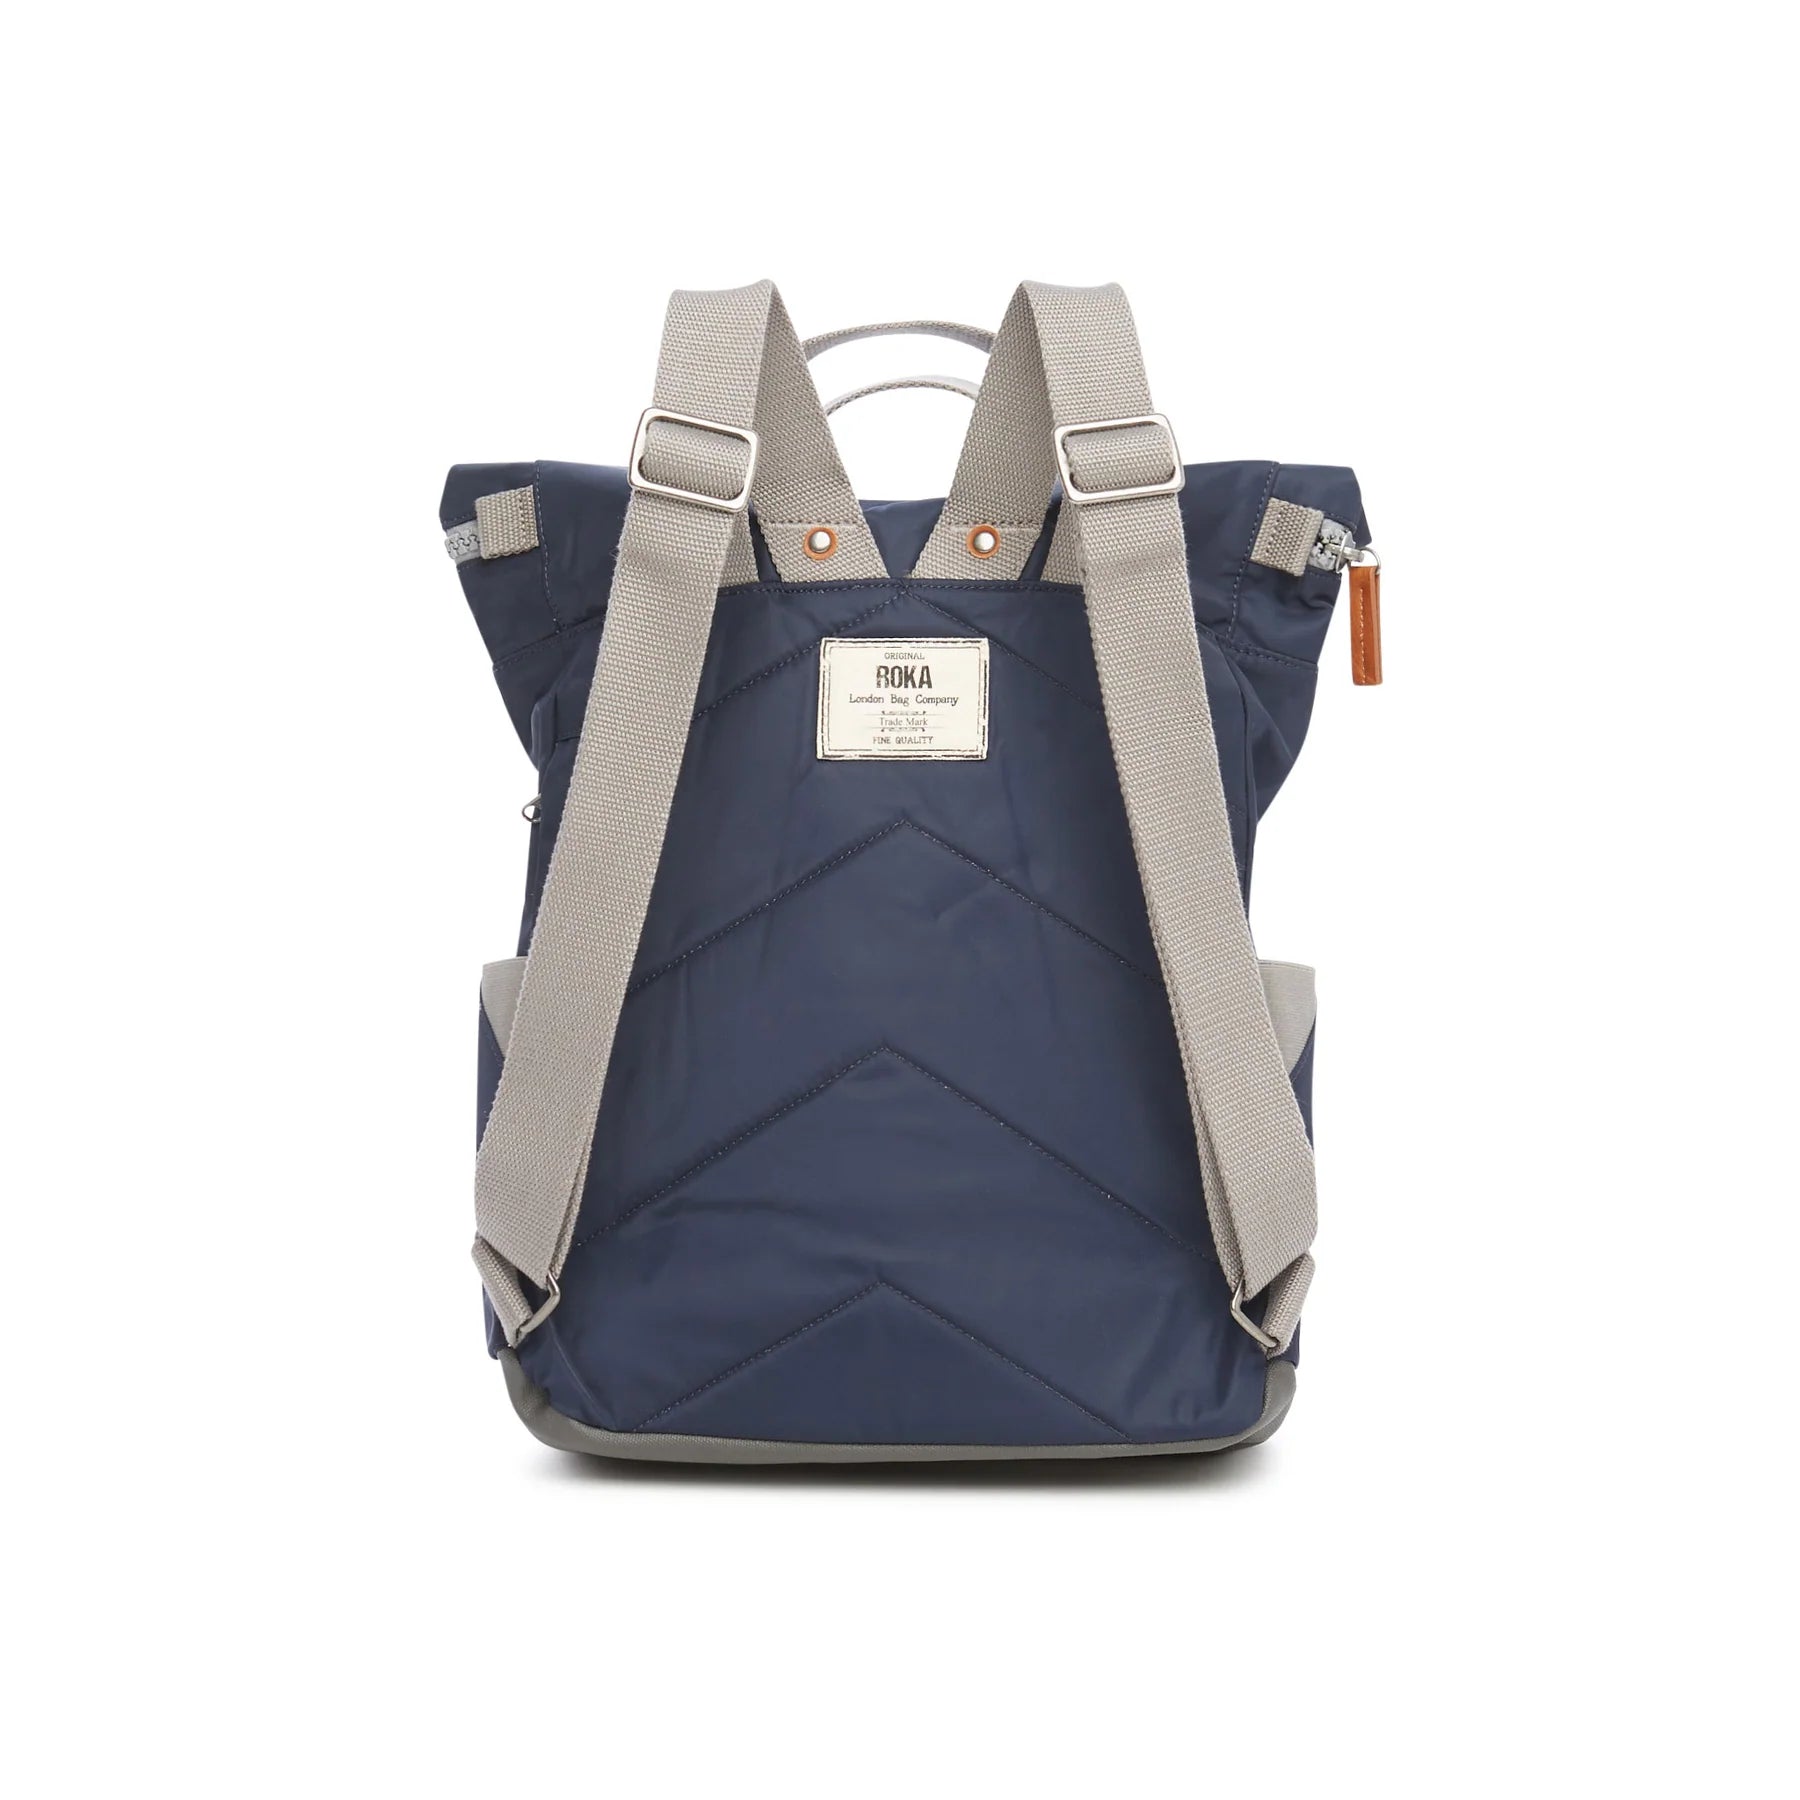 Navy Blue rucksack by ROKA photographed from the back with white background.